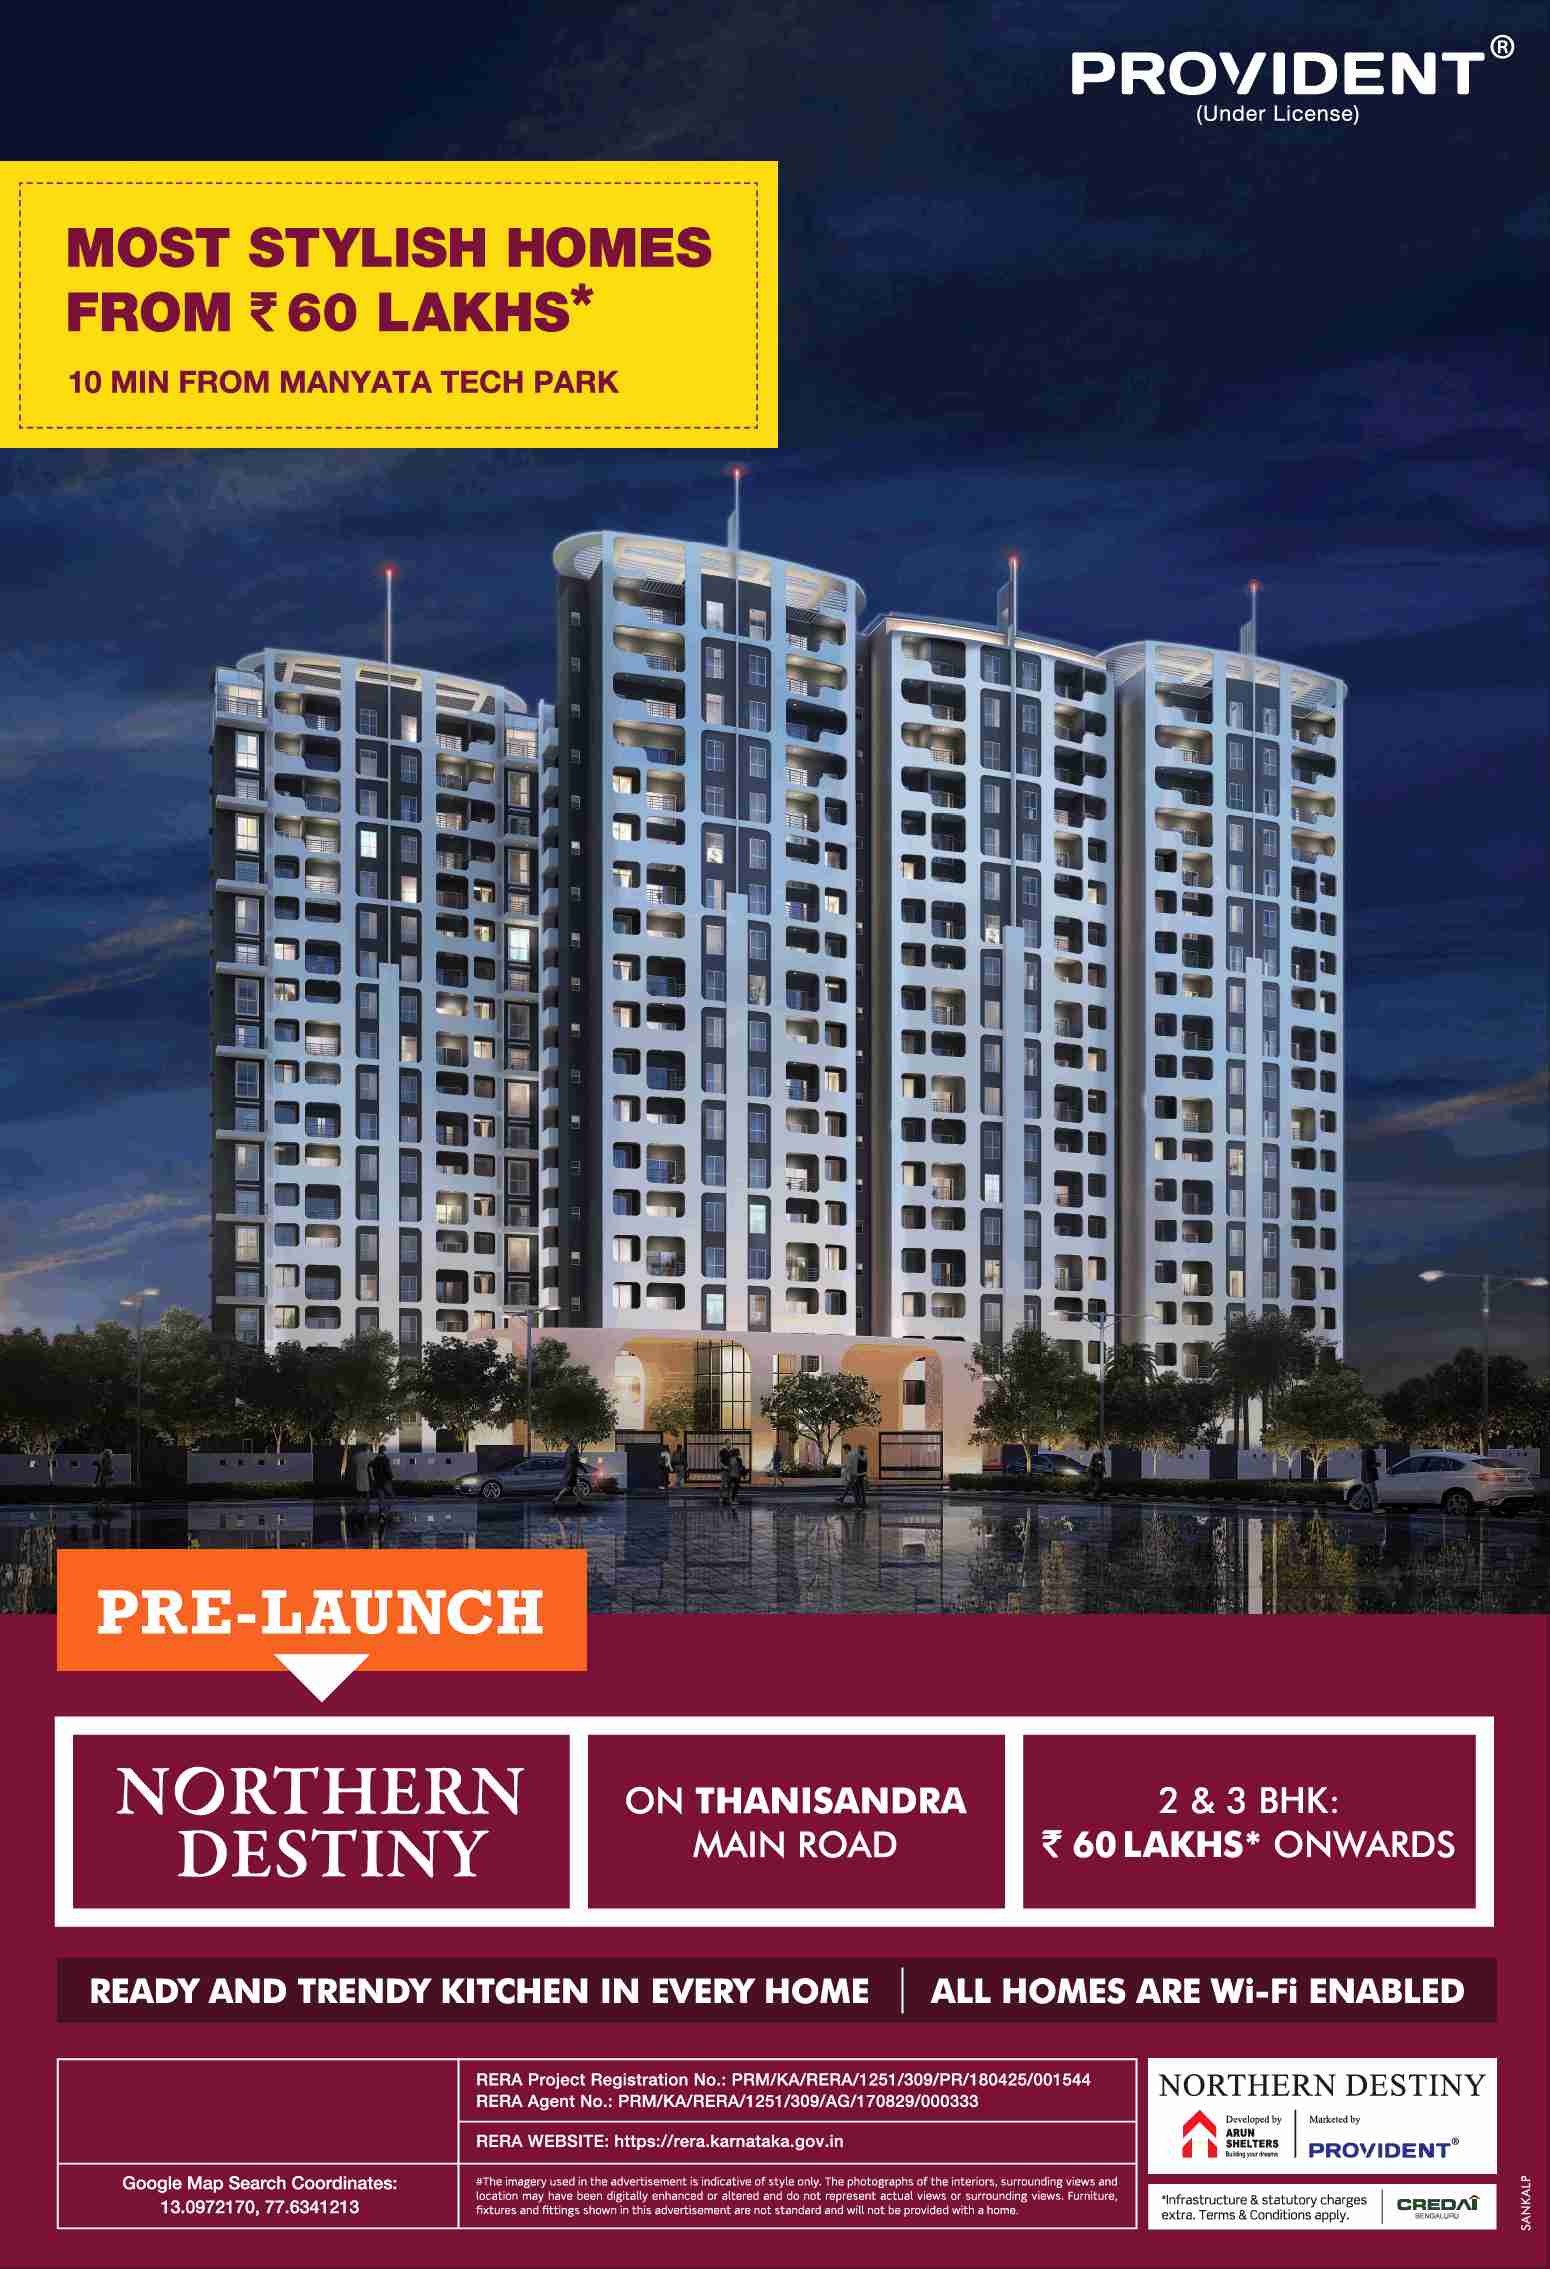 Get ready and trendy kitchen in every home at Provident Northern Destiny in Bangalore